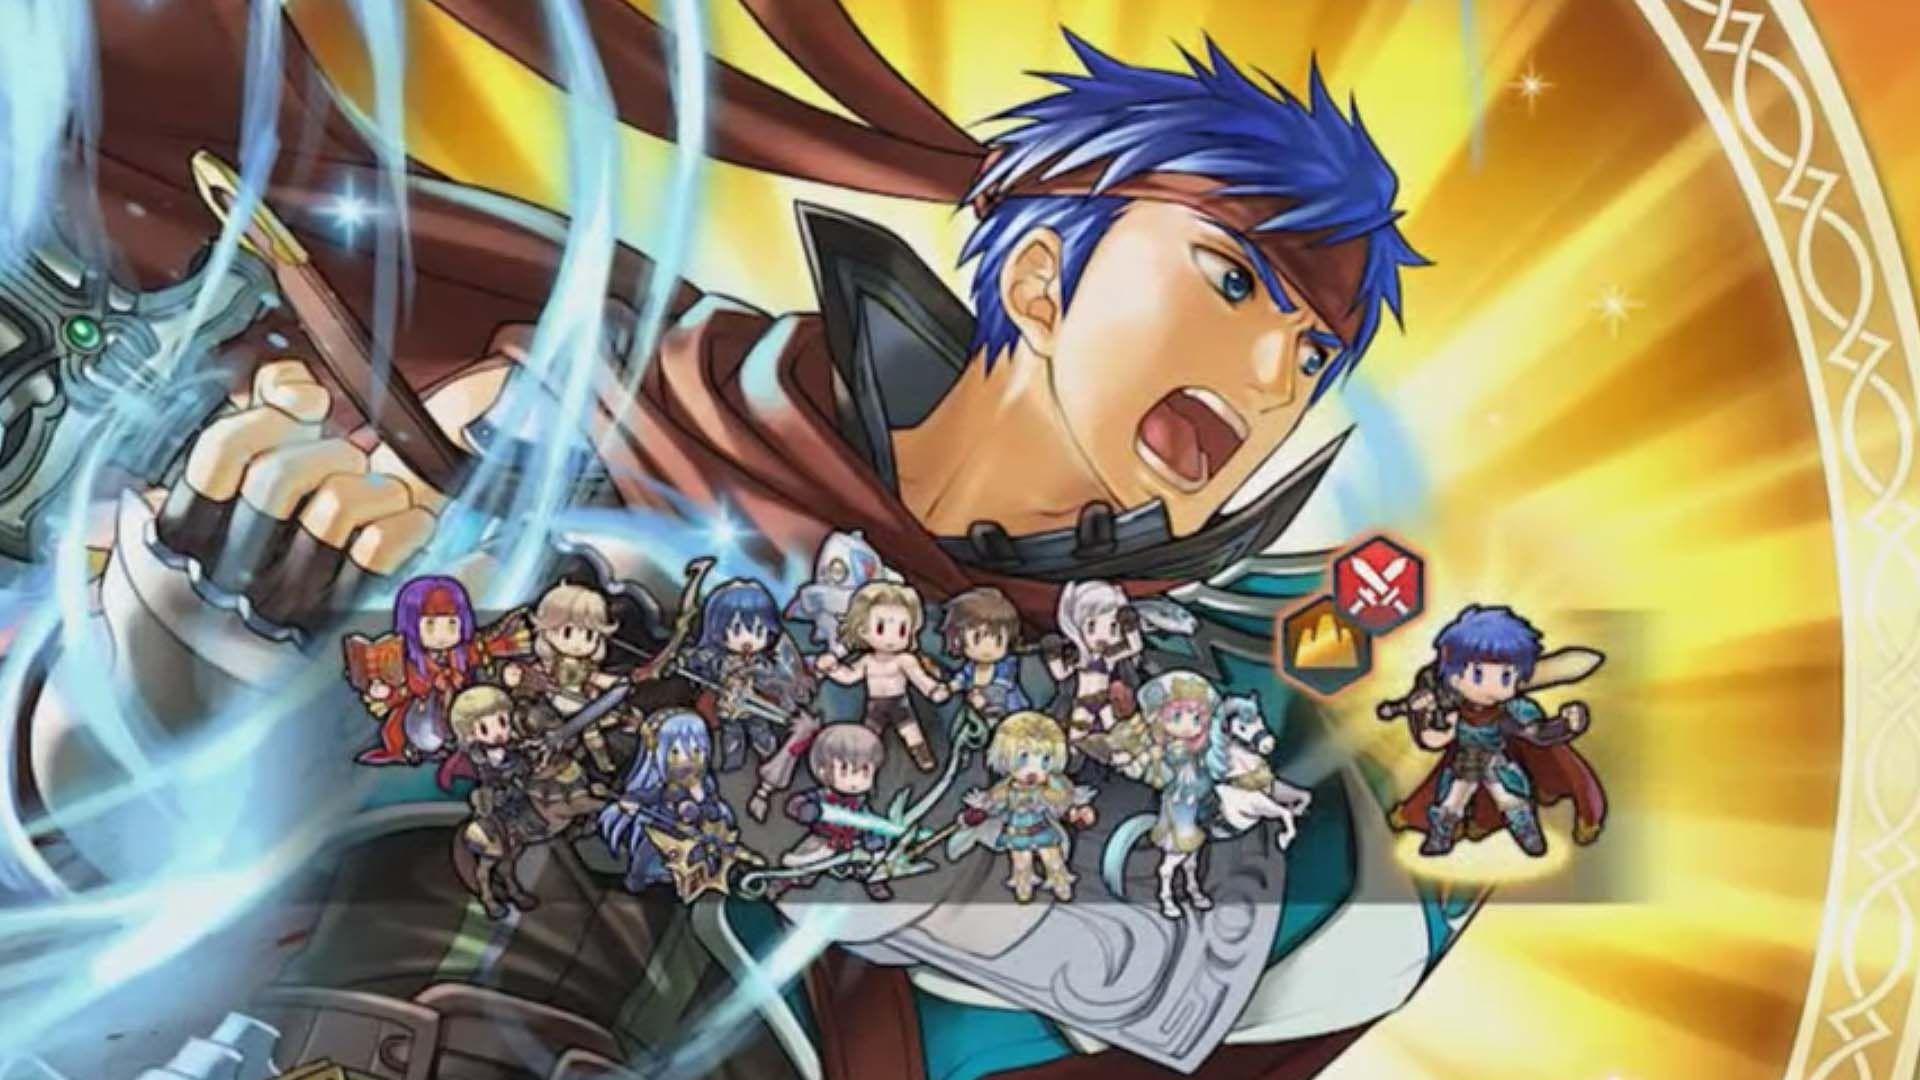 Fire Emblem Heroes adds Radiant Dawn version of Ike as game's third